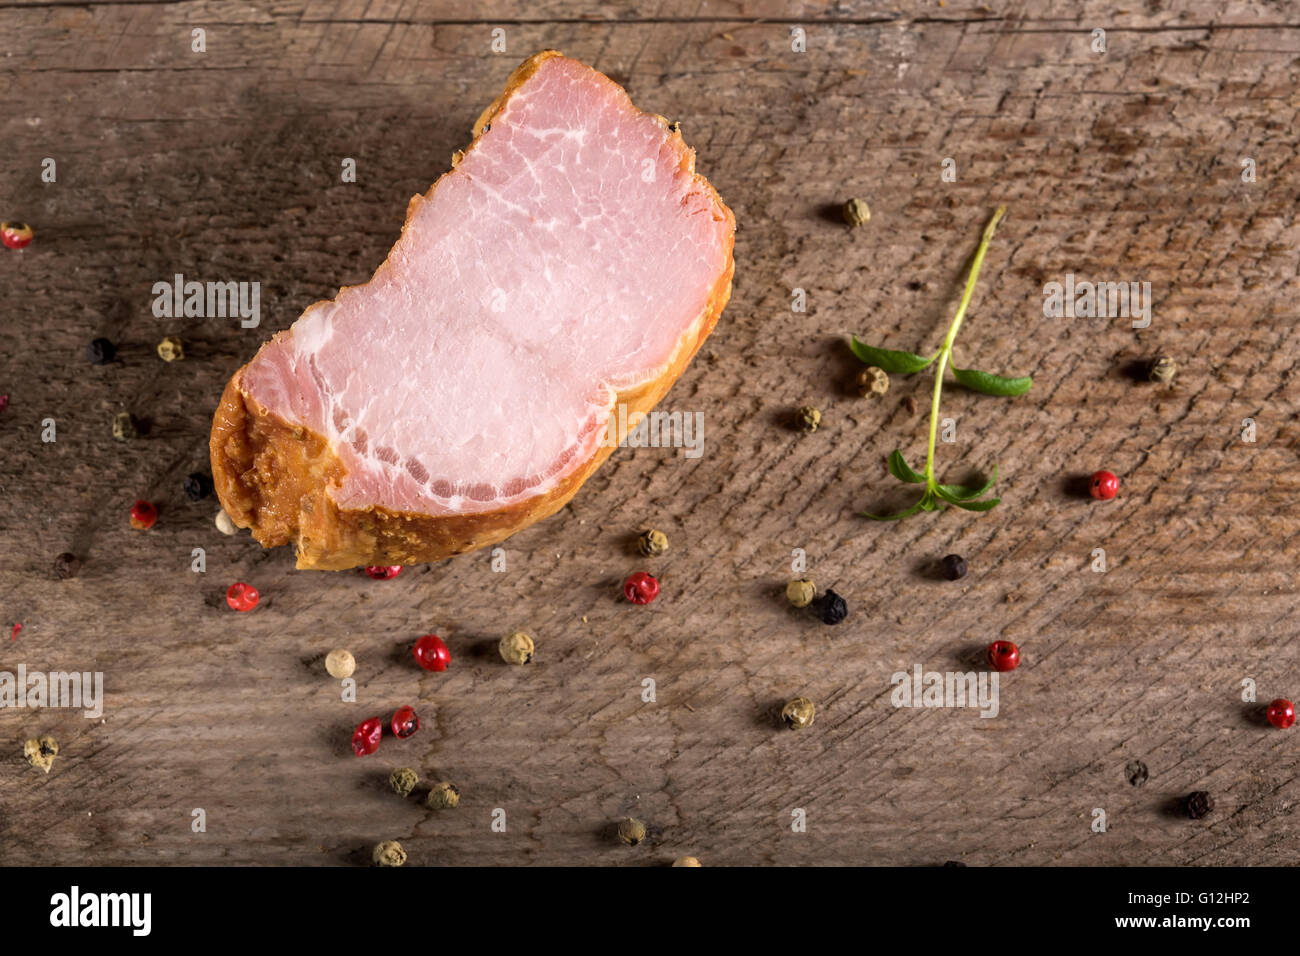 Smoked pork loin with spices over wooden background Stock Photo